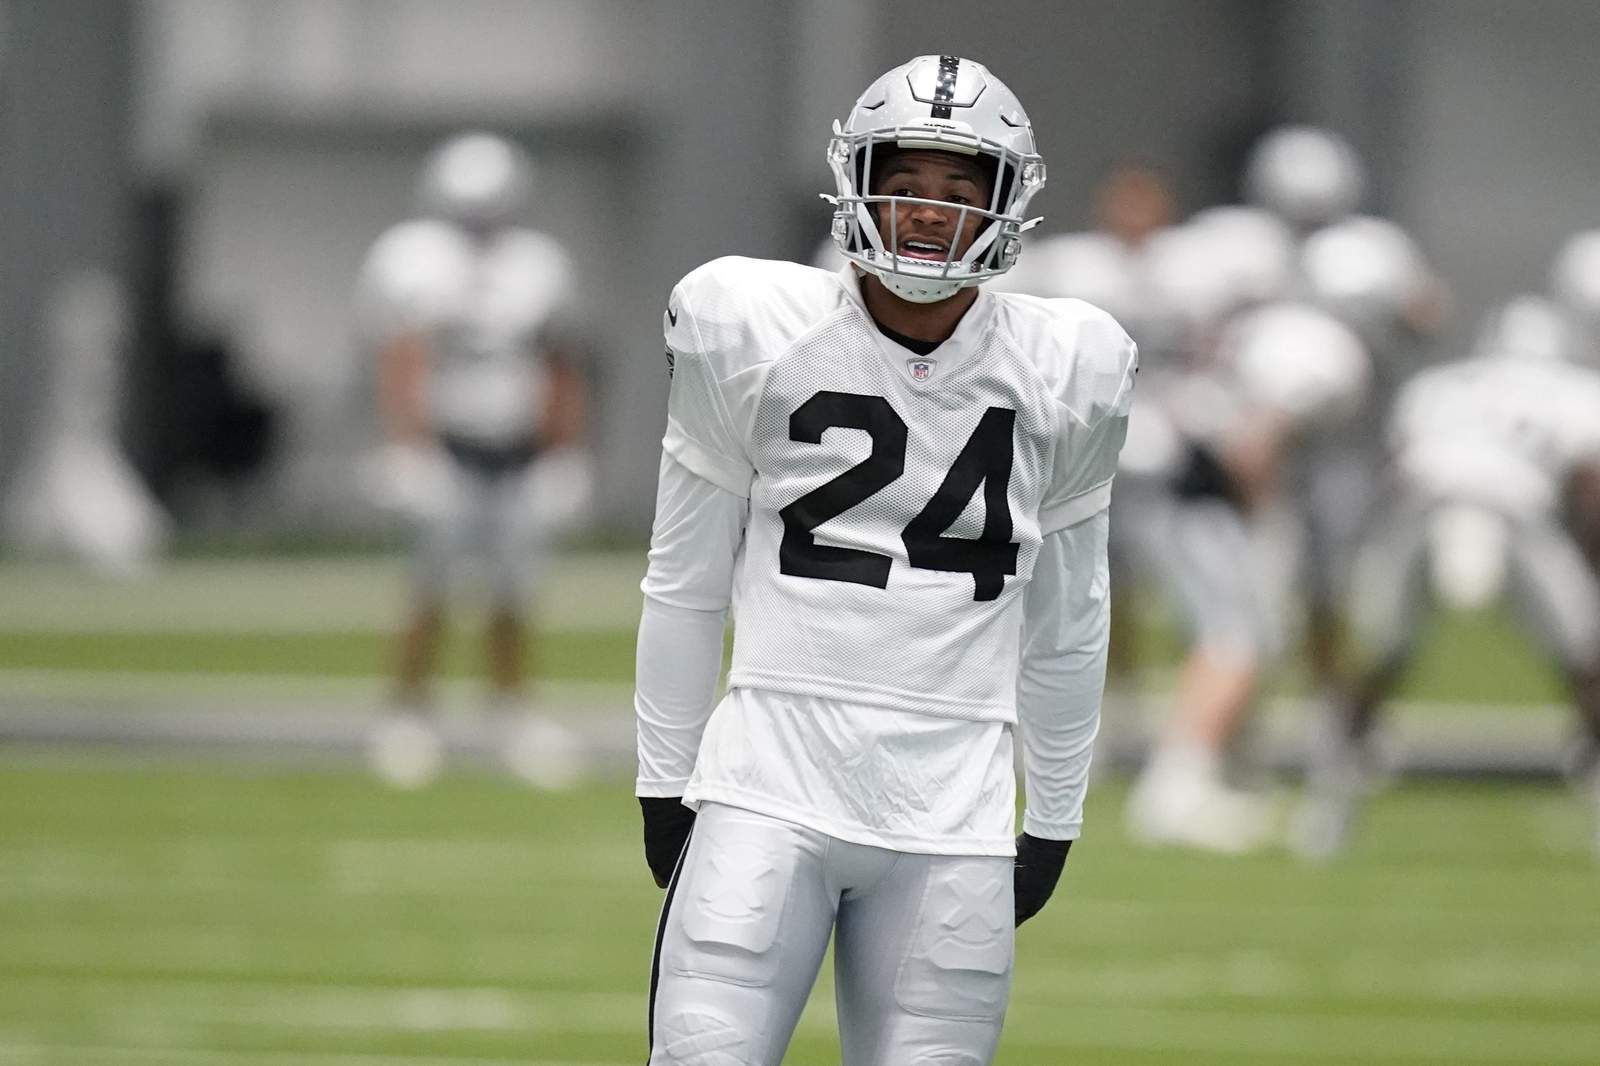 Abram, Simmons among 2nd-year players poised for breakouts